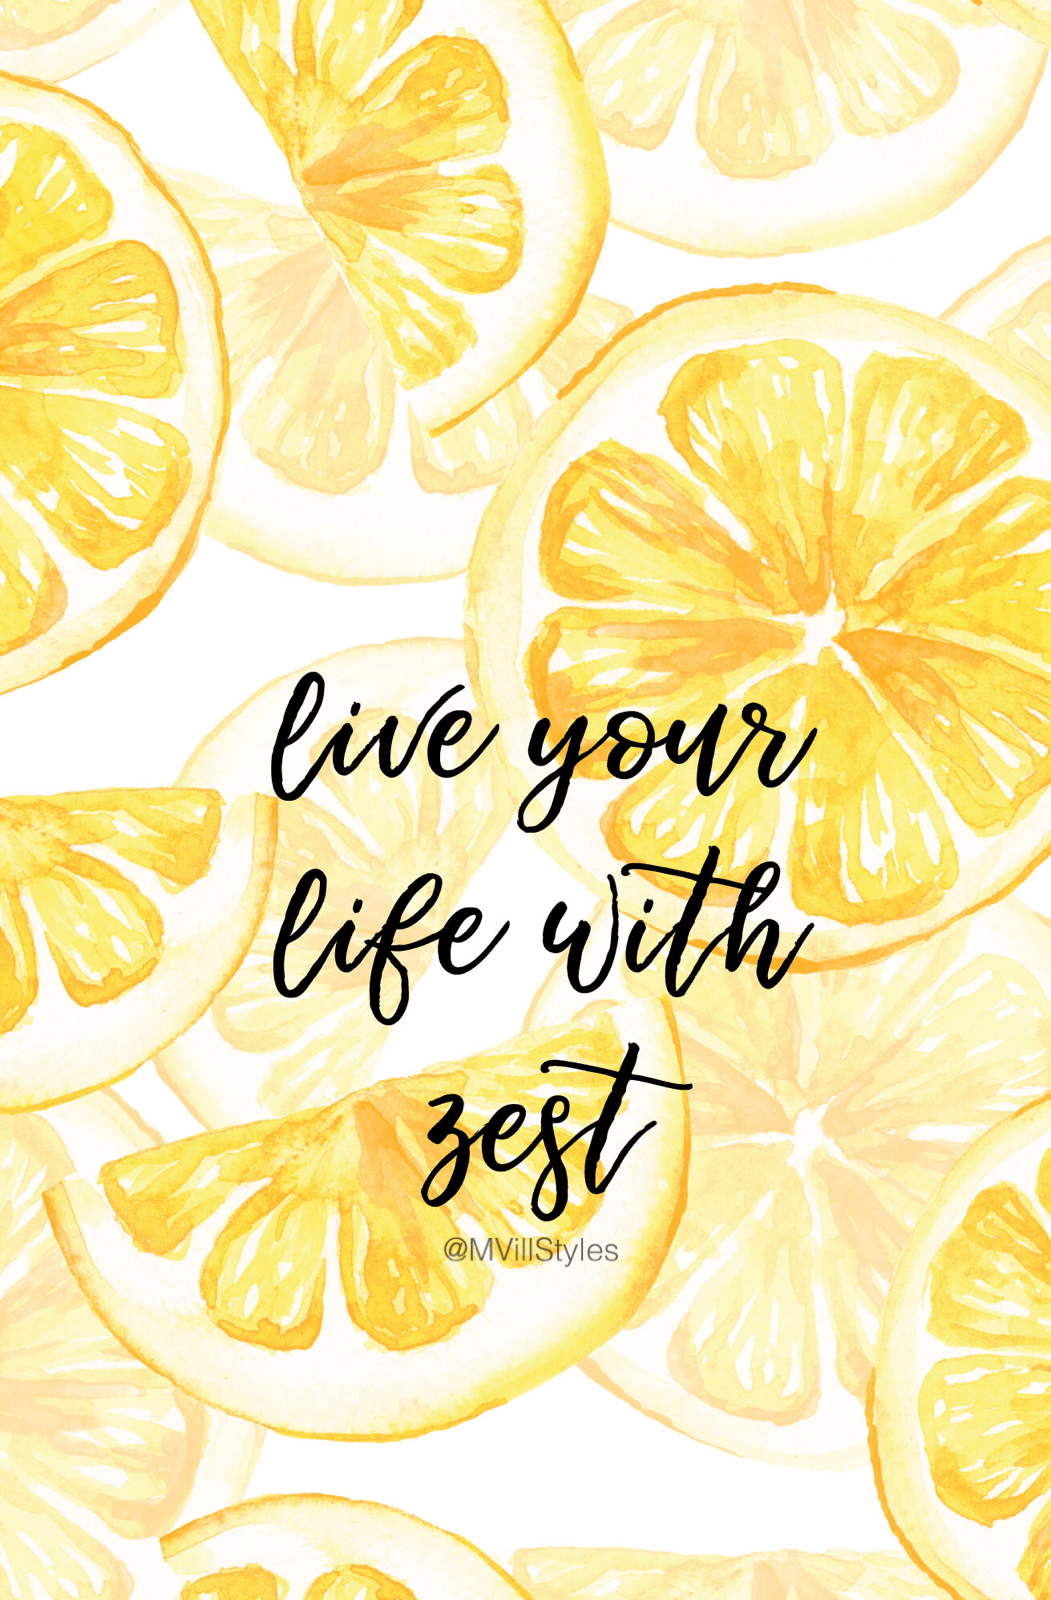 Live Your Life with Zest Lemon iPhone wallpaper. Summer wallpaper, Fruit wallpaper, iPhone wallpaper